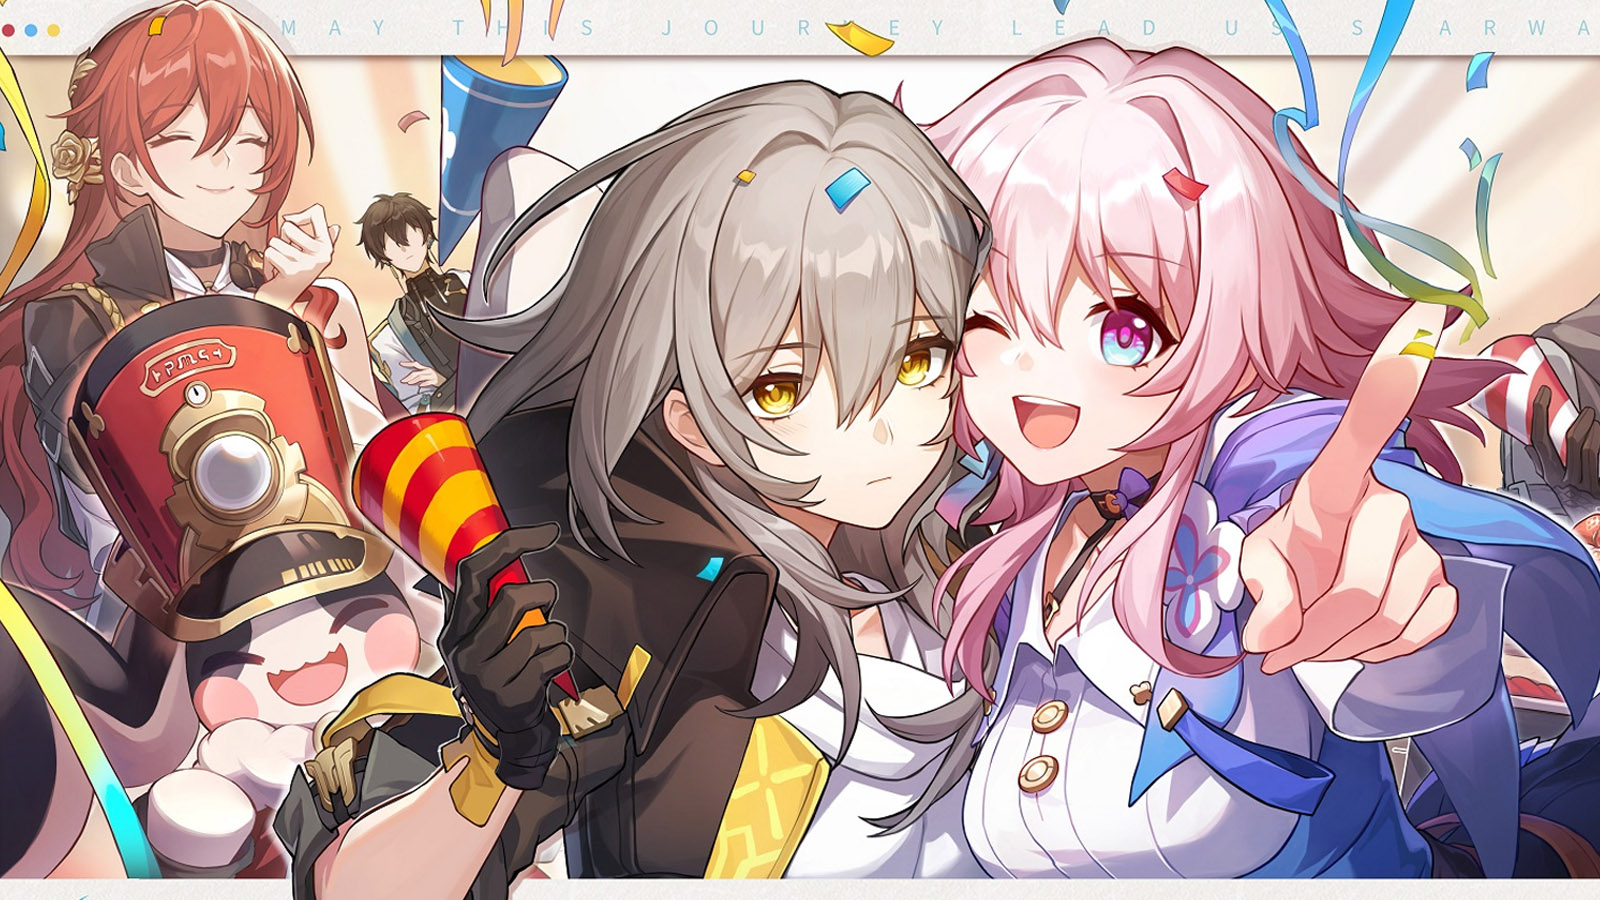 The Topaz character banner isn’t appealing to players of Honkai Star Rail.